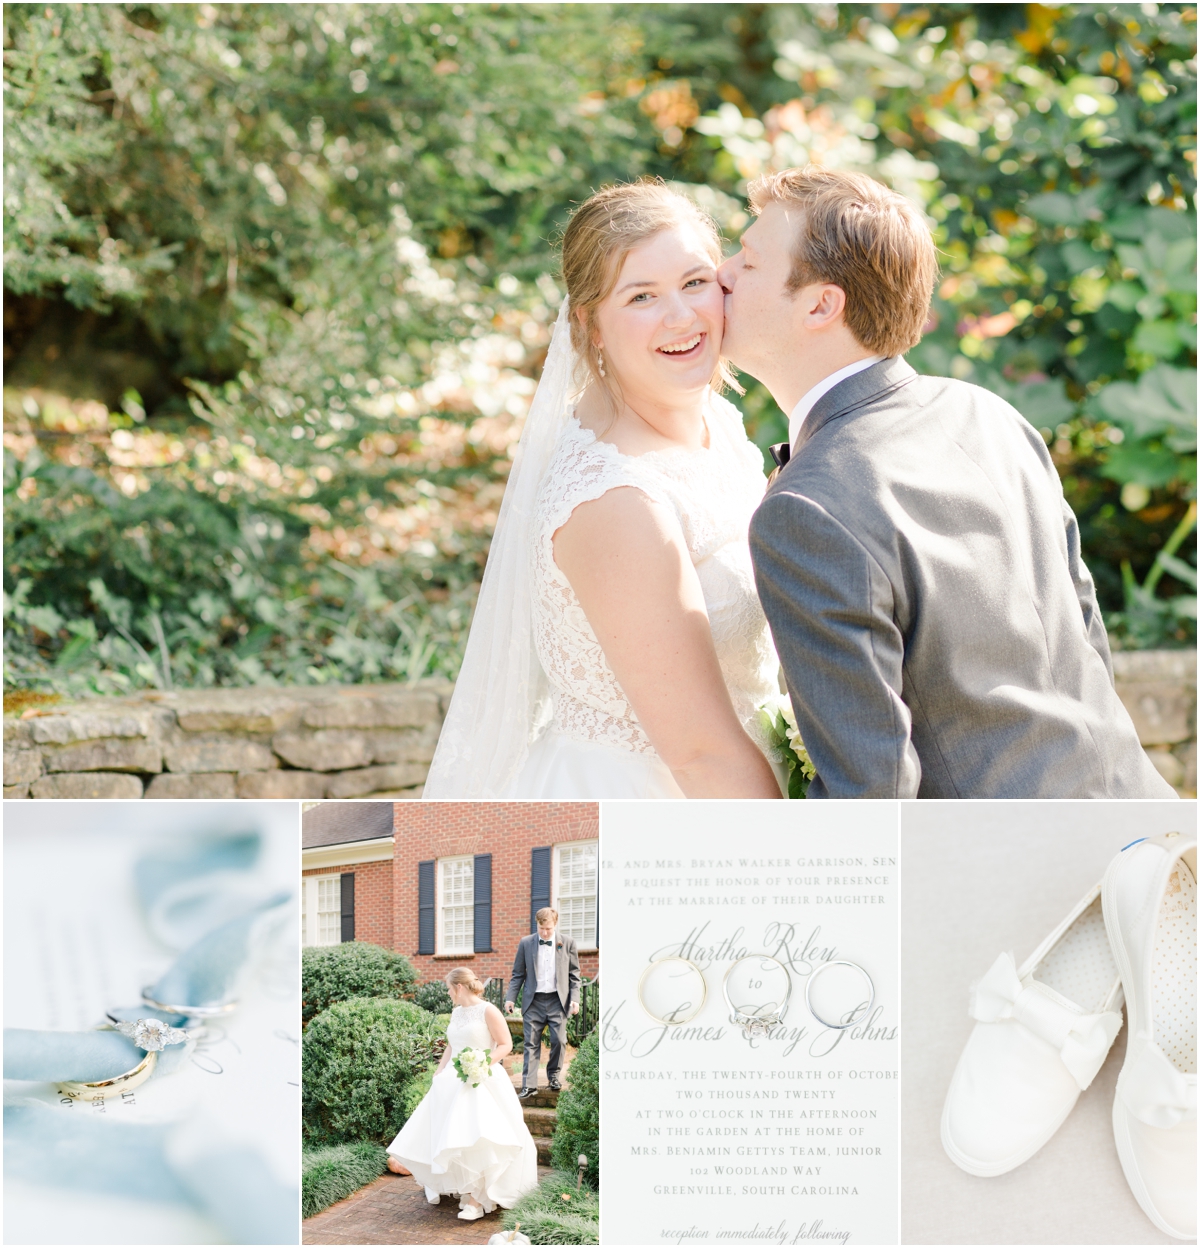 October Backyard wedding in Greenville SC with a reception at the Poinsett Club | Greenville Wedding Photographer